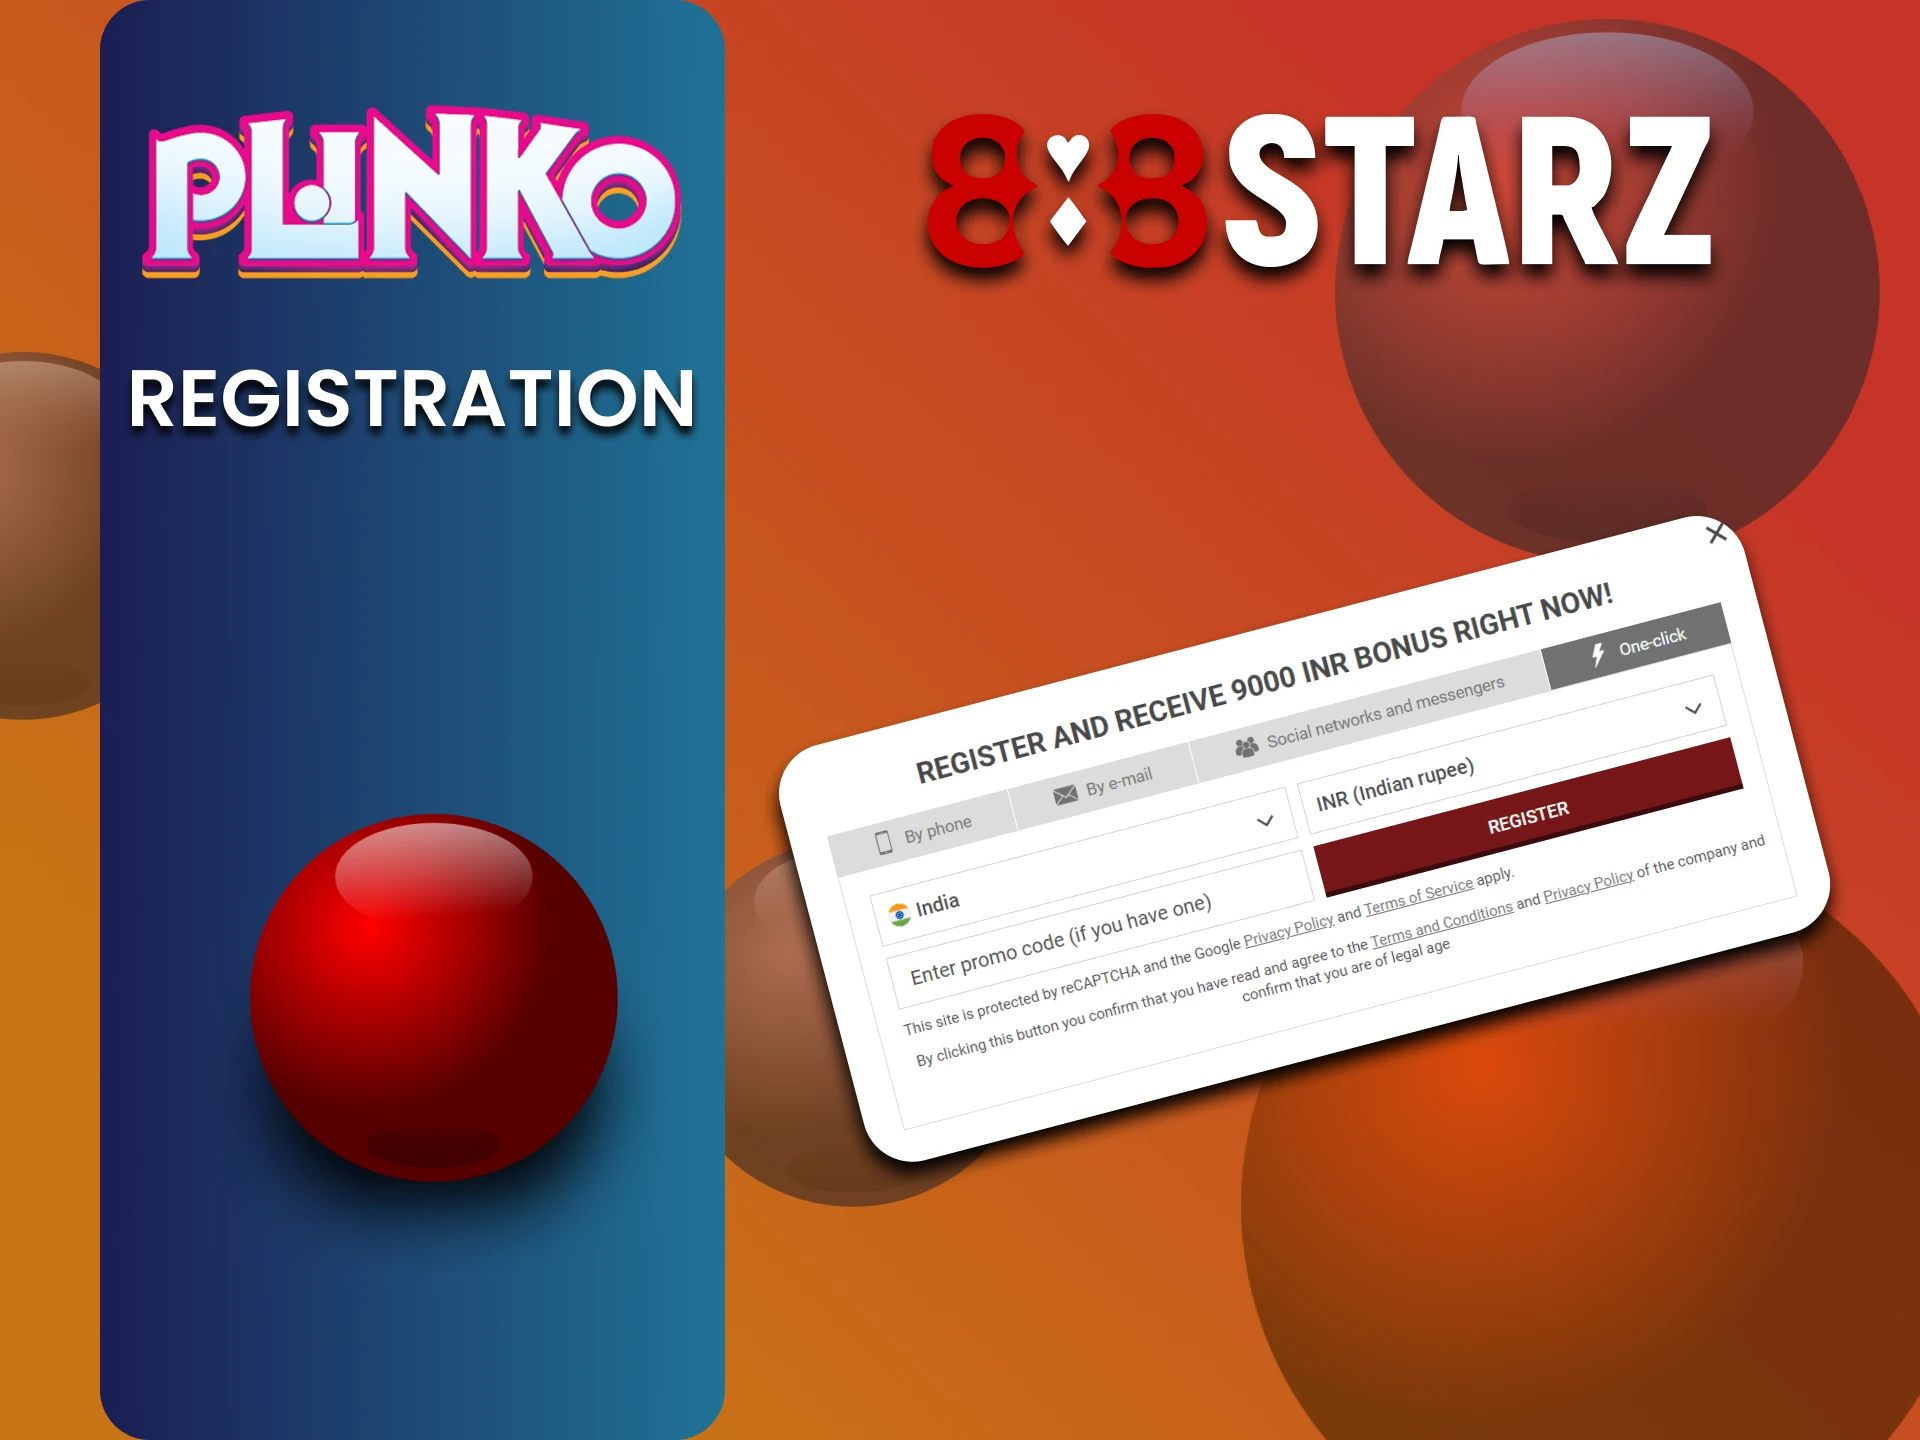 A simple registration is waiting for you at 888starz website to play Plinko.